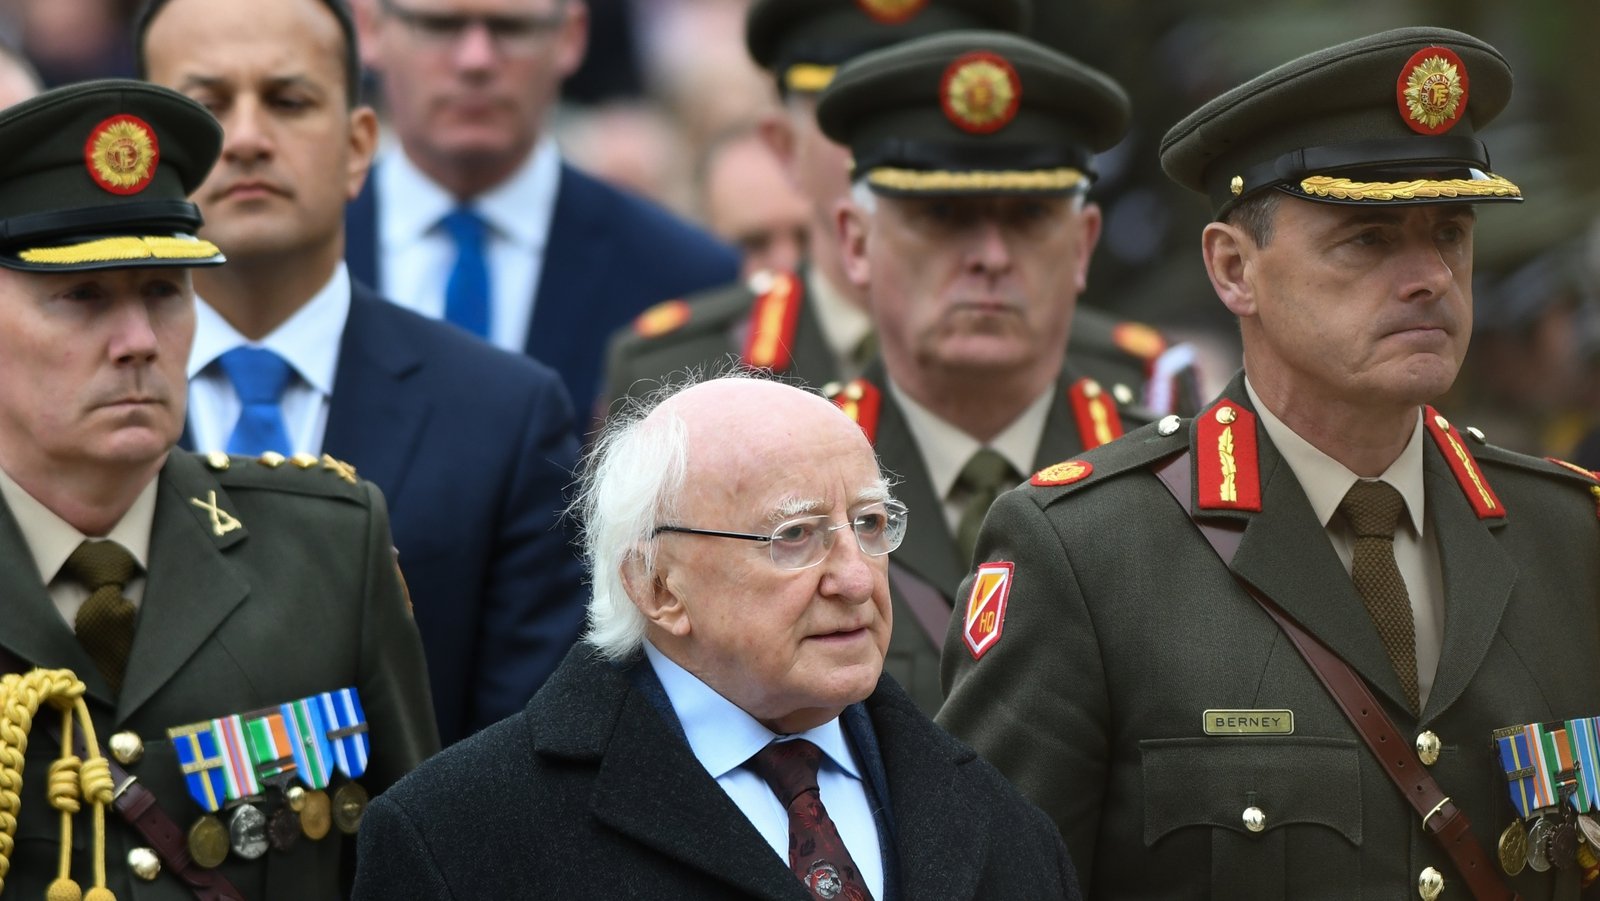 Image - President Higgins attends the Easter Sunday Commemoration Ceremony at the GPO in March 2016